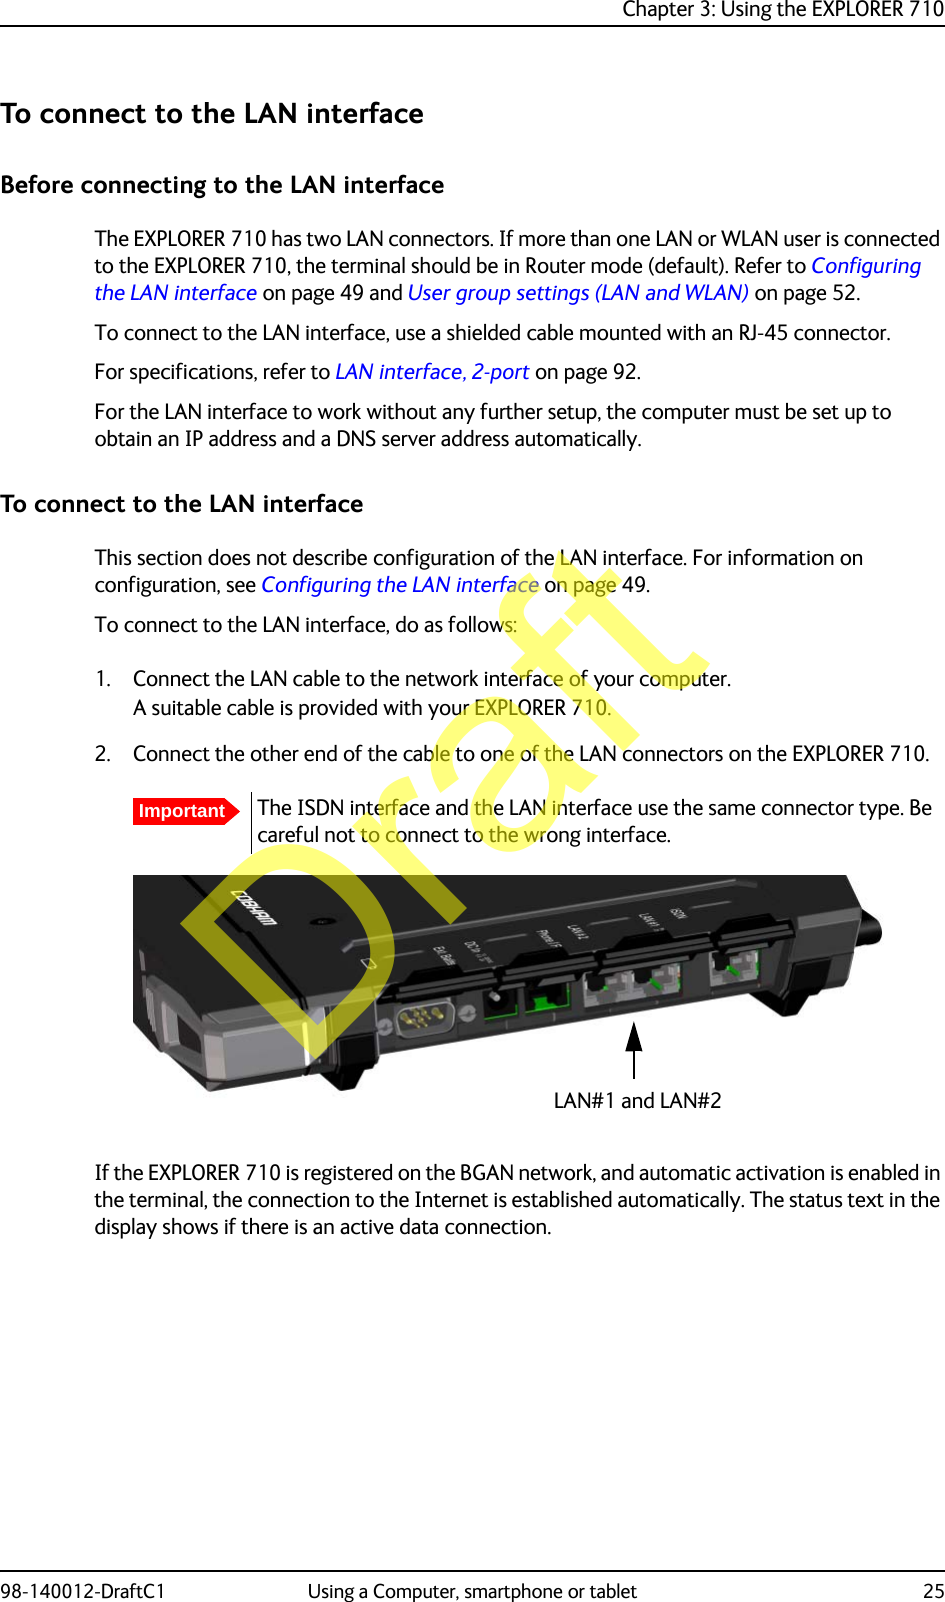 Chapter 3: Using the EXPLORER 71098-140012-DraftC1 Using a Computer, smartphone or tablet 25To connect to the LAN interfaceBefore connecting to the LAN interfaceThe EXPLORER 710 has two LAN connectors. If more than one LAN or WLAN user is connected to the EXPLORER 710, the terminal should be in Router mode (default). Refer to Configuring the LAN interface on page 49 and User group settings (LAN and WLAN) on page 52.To connect to the LAN interface, use a shielded cable mounted with an RJ-45 connector. For specifications, refer to LAN interface, 2-port on page 92.For the LAN interface to work without any further setup, the computer must be set up to obtain an IP address and a DNS server address automatically. To connect to the LAN interfaceThis section does not describe configuration of the LAN interface. For information on configuration, see Configuring the LAN interface on page 49.To connect to the LAN interface, do as follows:1. Connect the LAN cable to the network interface of your computer.A suitable cable is provided with your EXPLORER 710.2. Connect the other end of the cable to one of the LAN connectors on the EXPLORER 710.If the EXPLORER 710 is registered on the BGAN network, and automatic activation is enabled in the terminal, the connection to the Internet is established automatically. The status text in the display shows if there is an active data connection.ImportantThe ISDN interface and the LAN interface use the same connector type. Be careful not to connect to the wrong interface.LAN#1 and LAN#2Draft